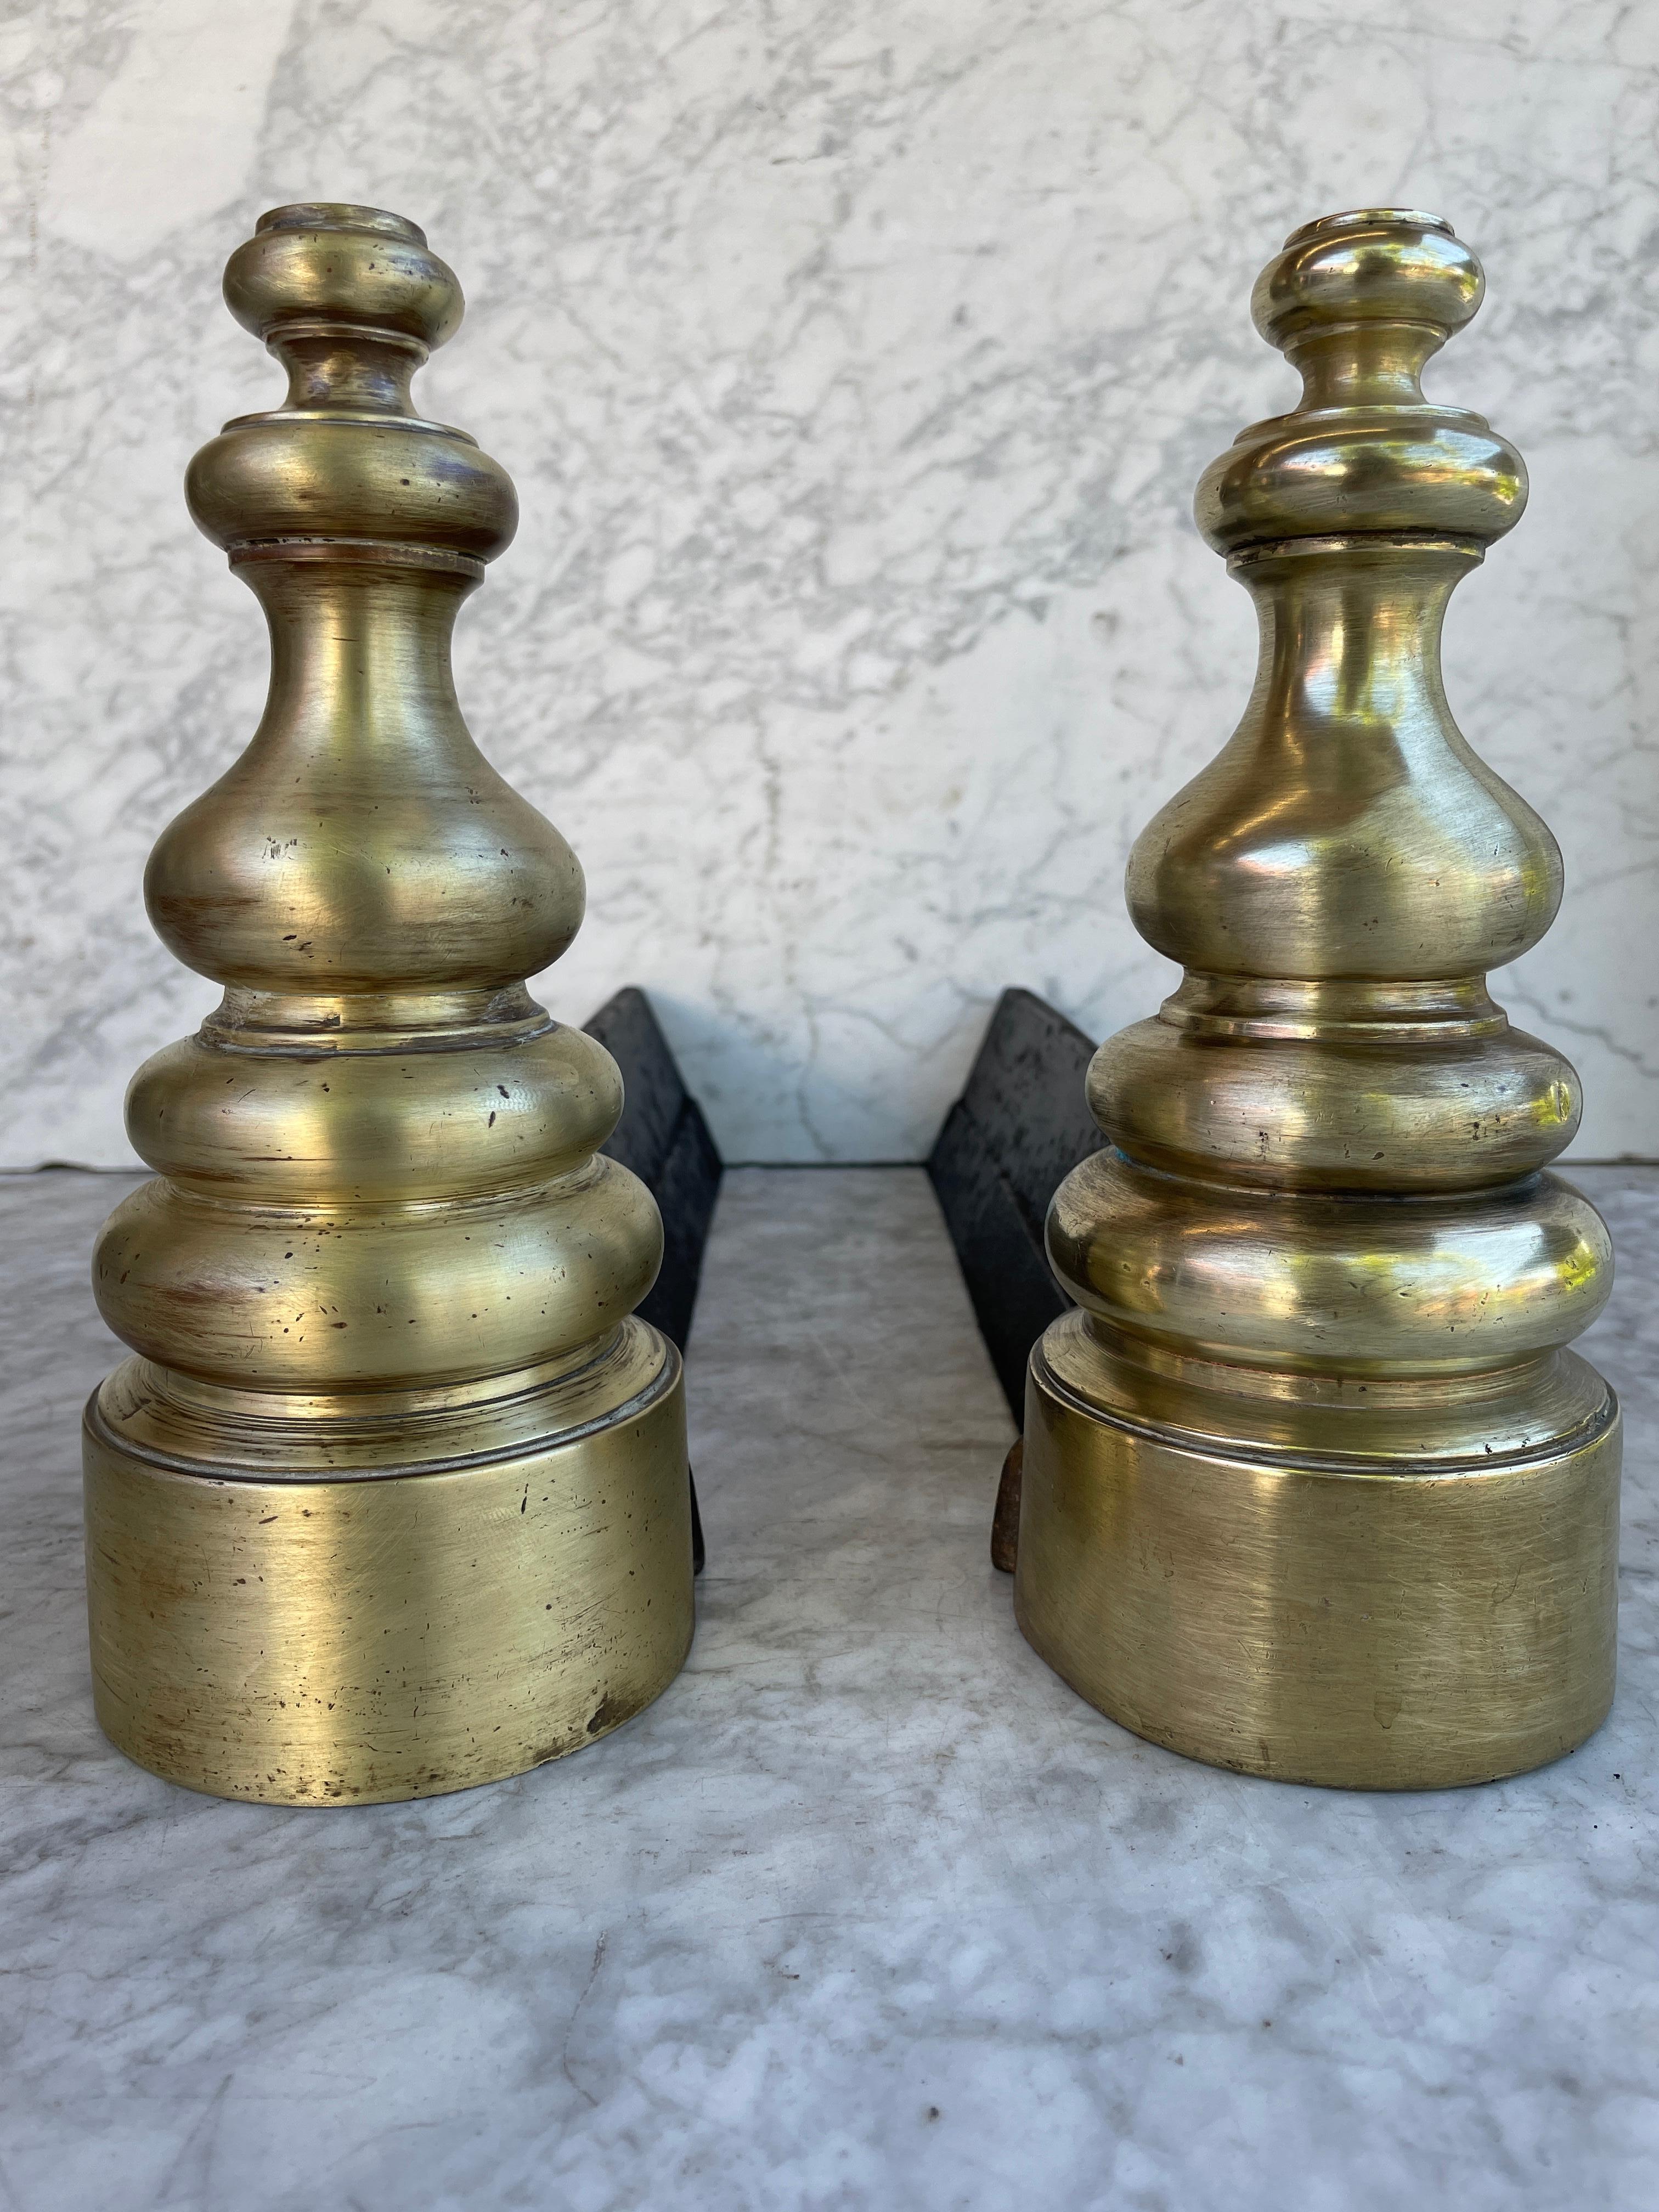 French Napoleon III andirons made of brass and cast iron. The andirons are in a good condition.